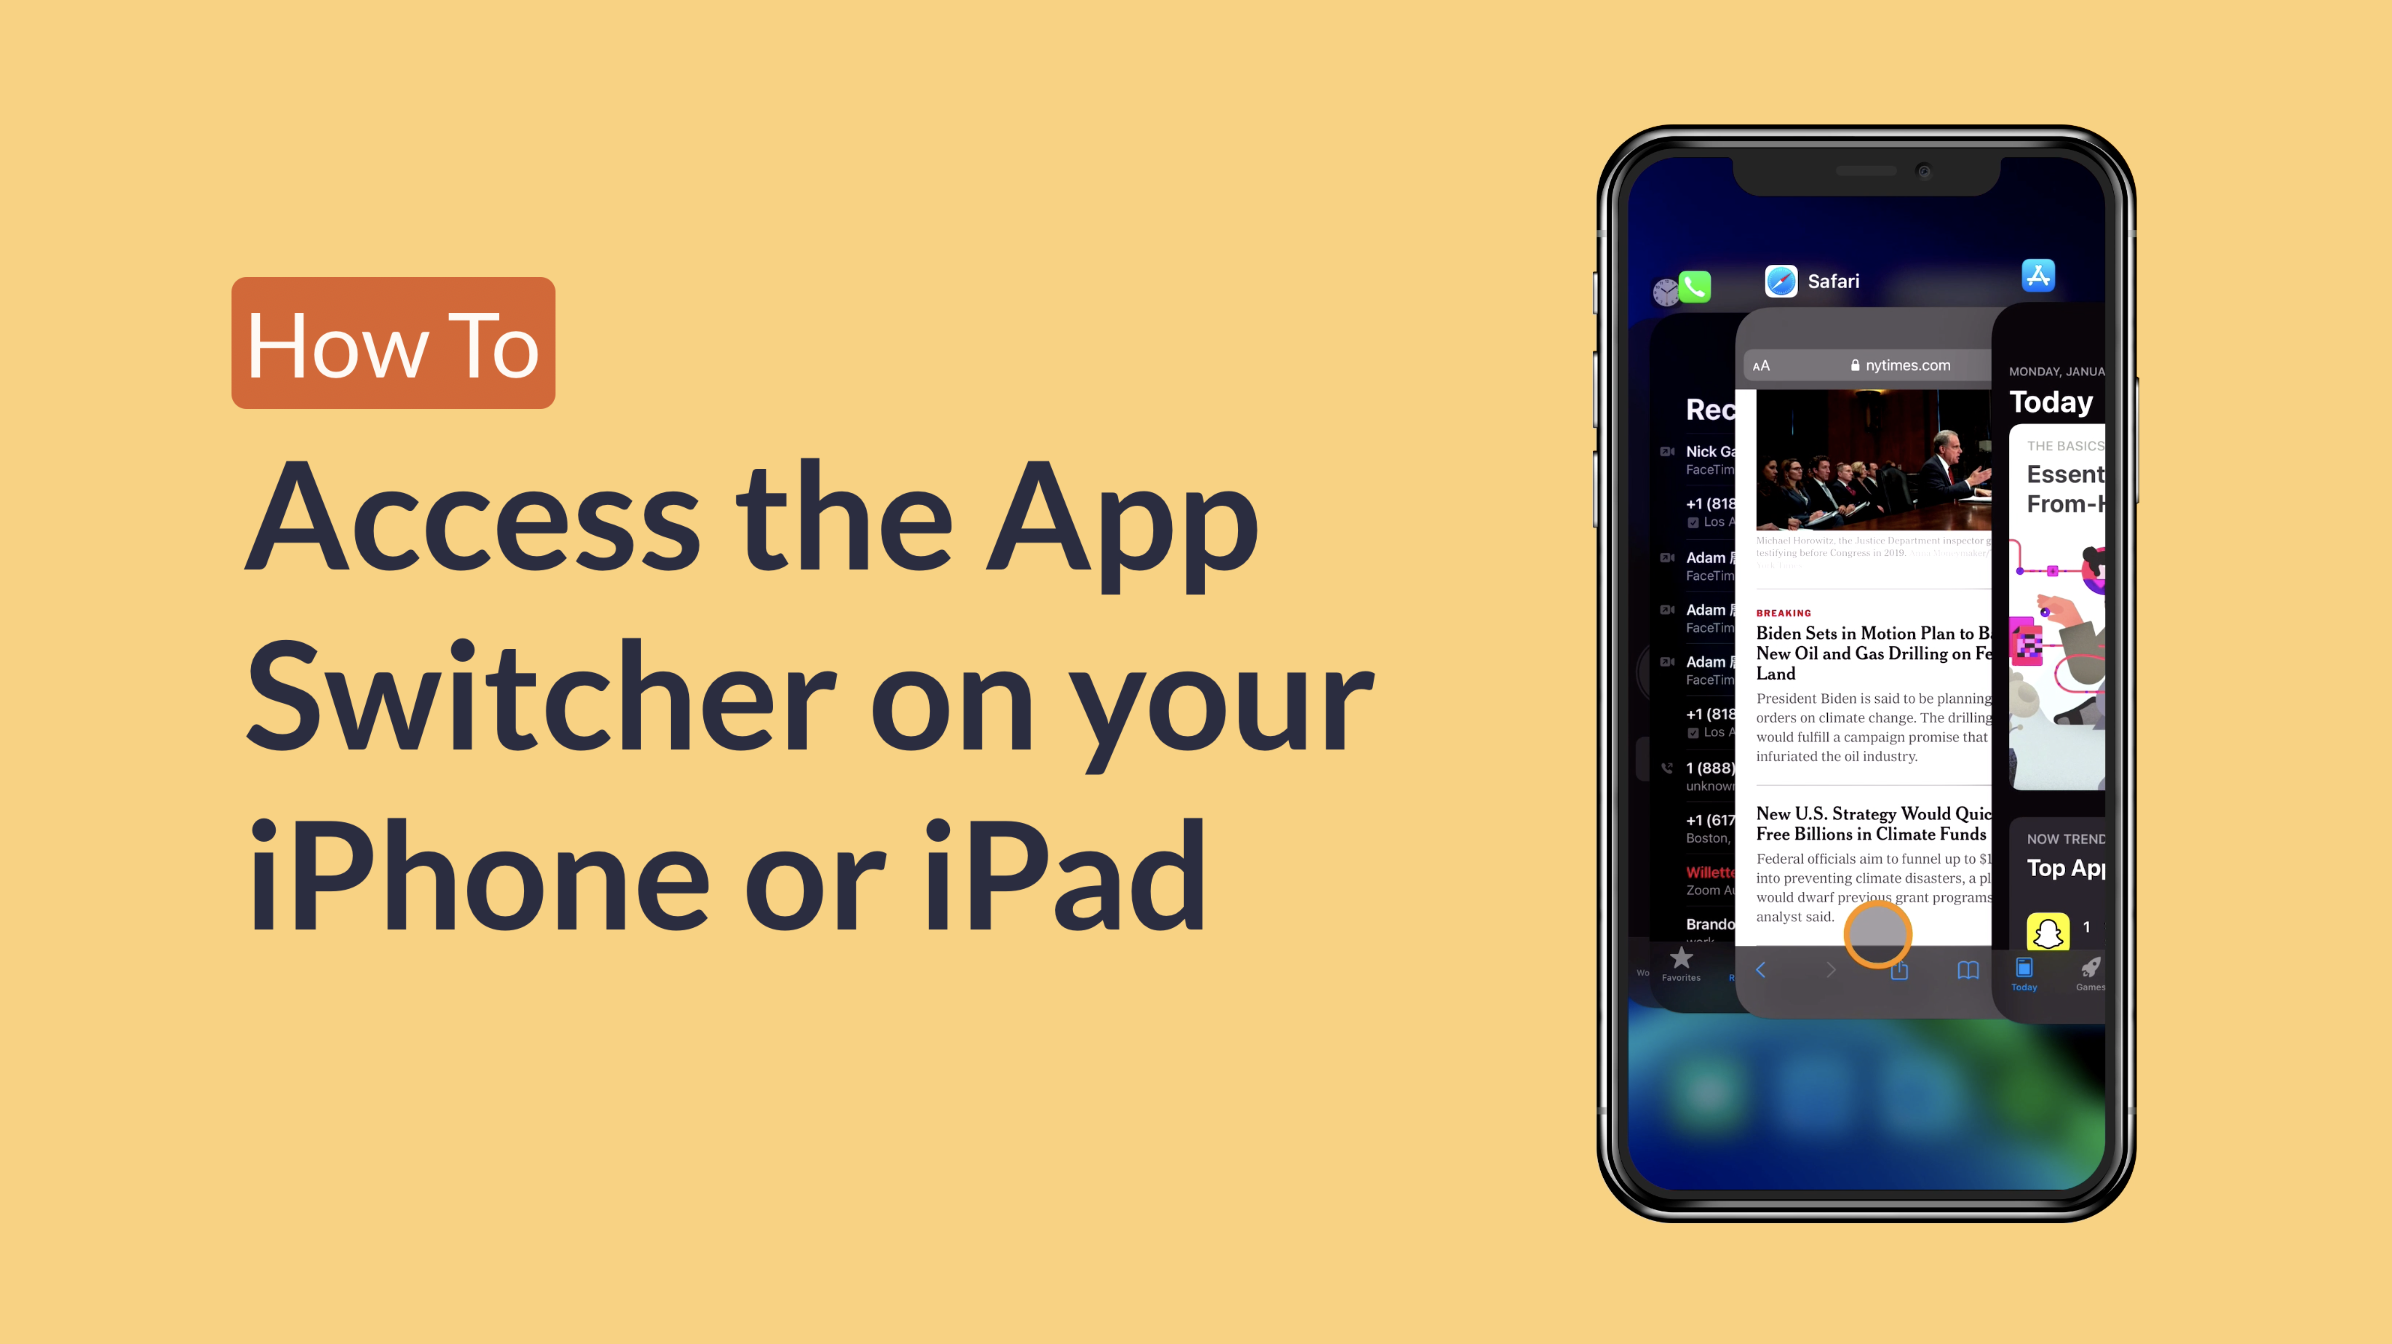 Discover how to access the App Switcher on your iPhone or iPad because sometimes you just want to go back to the app you were just looking at